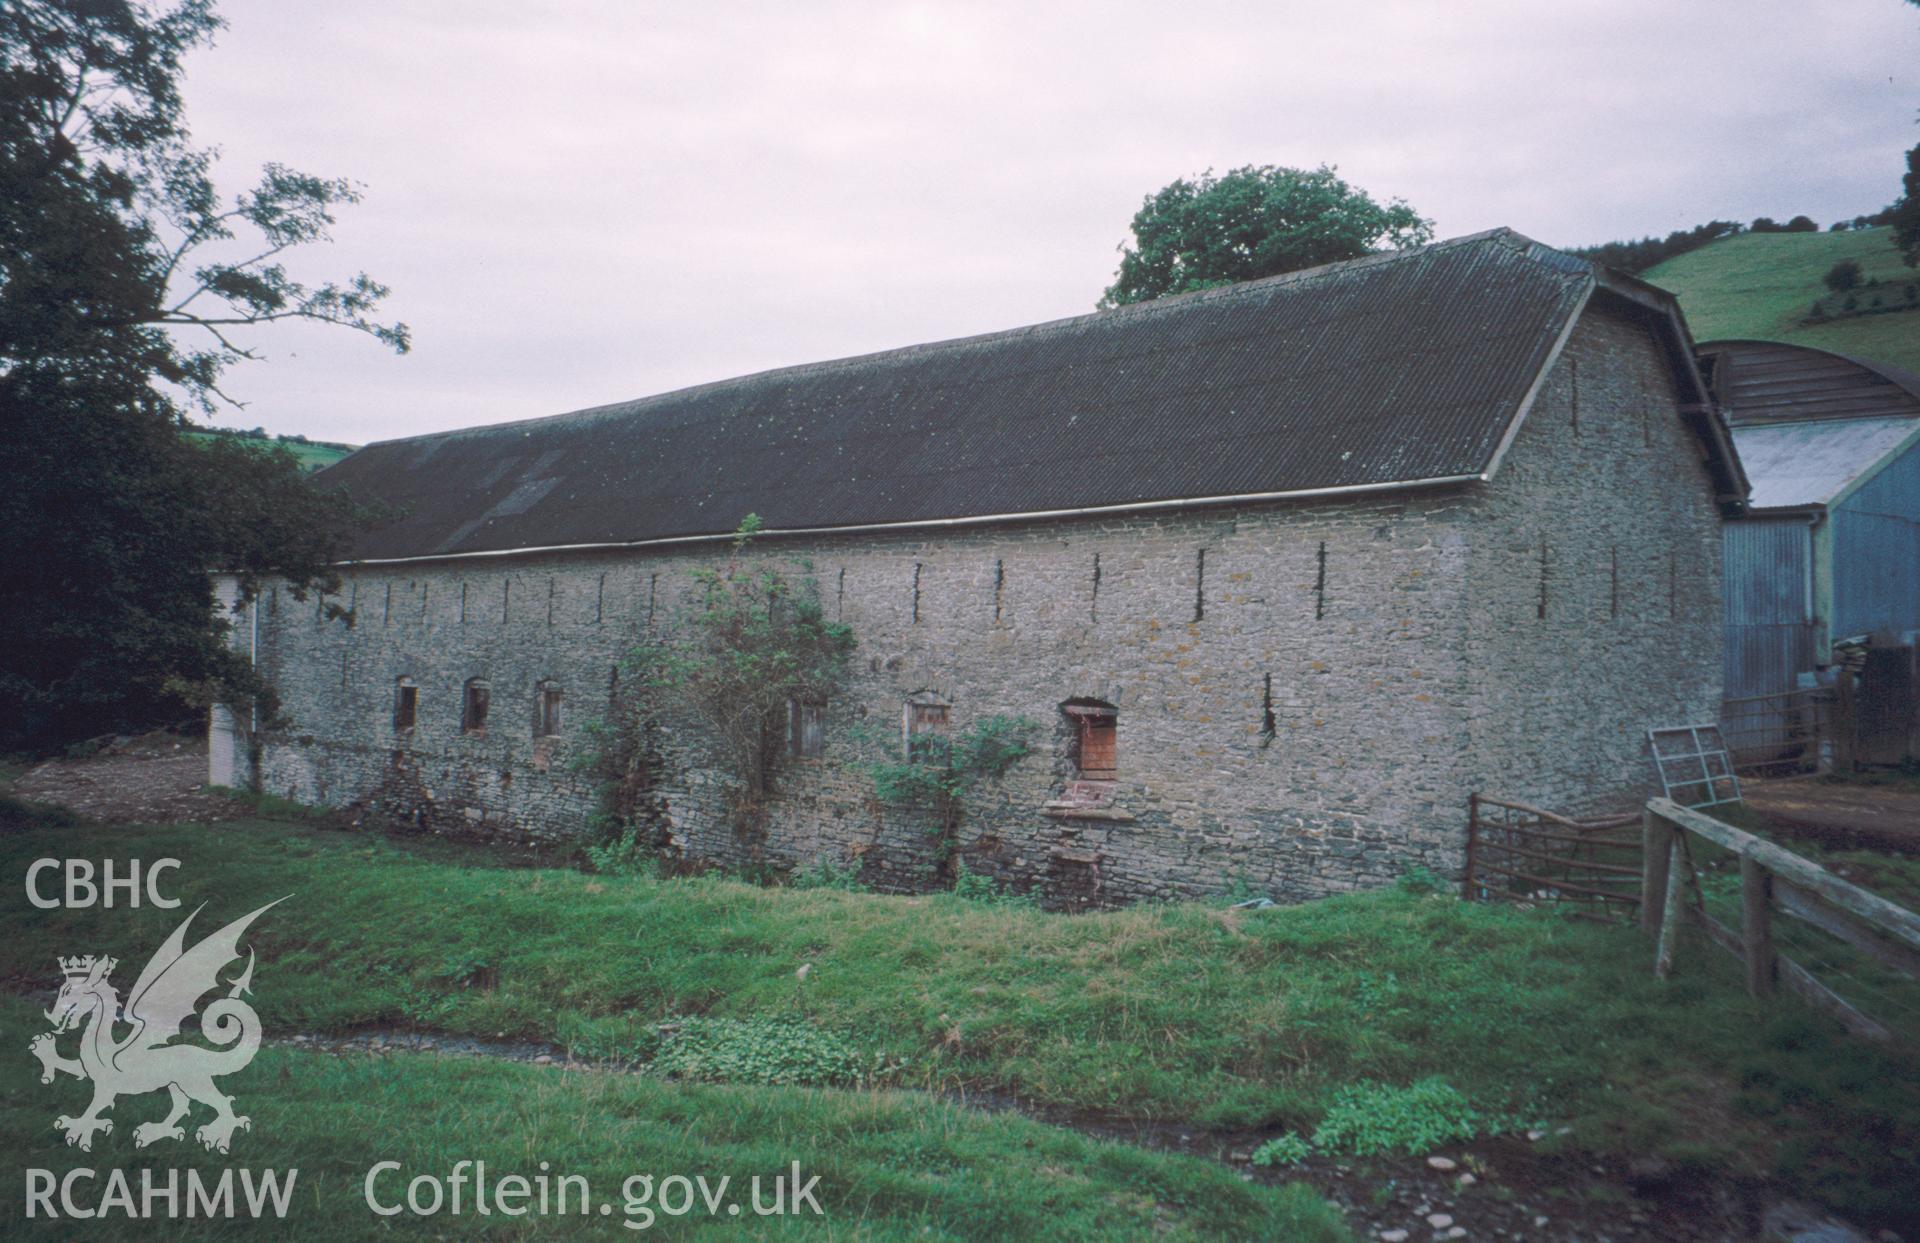 Digital copy of a colour slide showing exterior view of Pilleth Court Farm Building, produced by Geoff Ward.